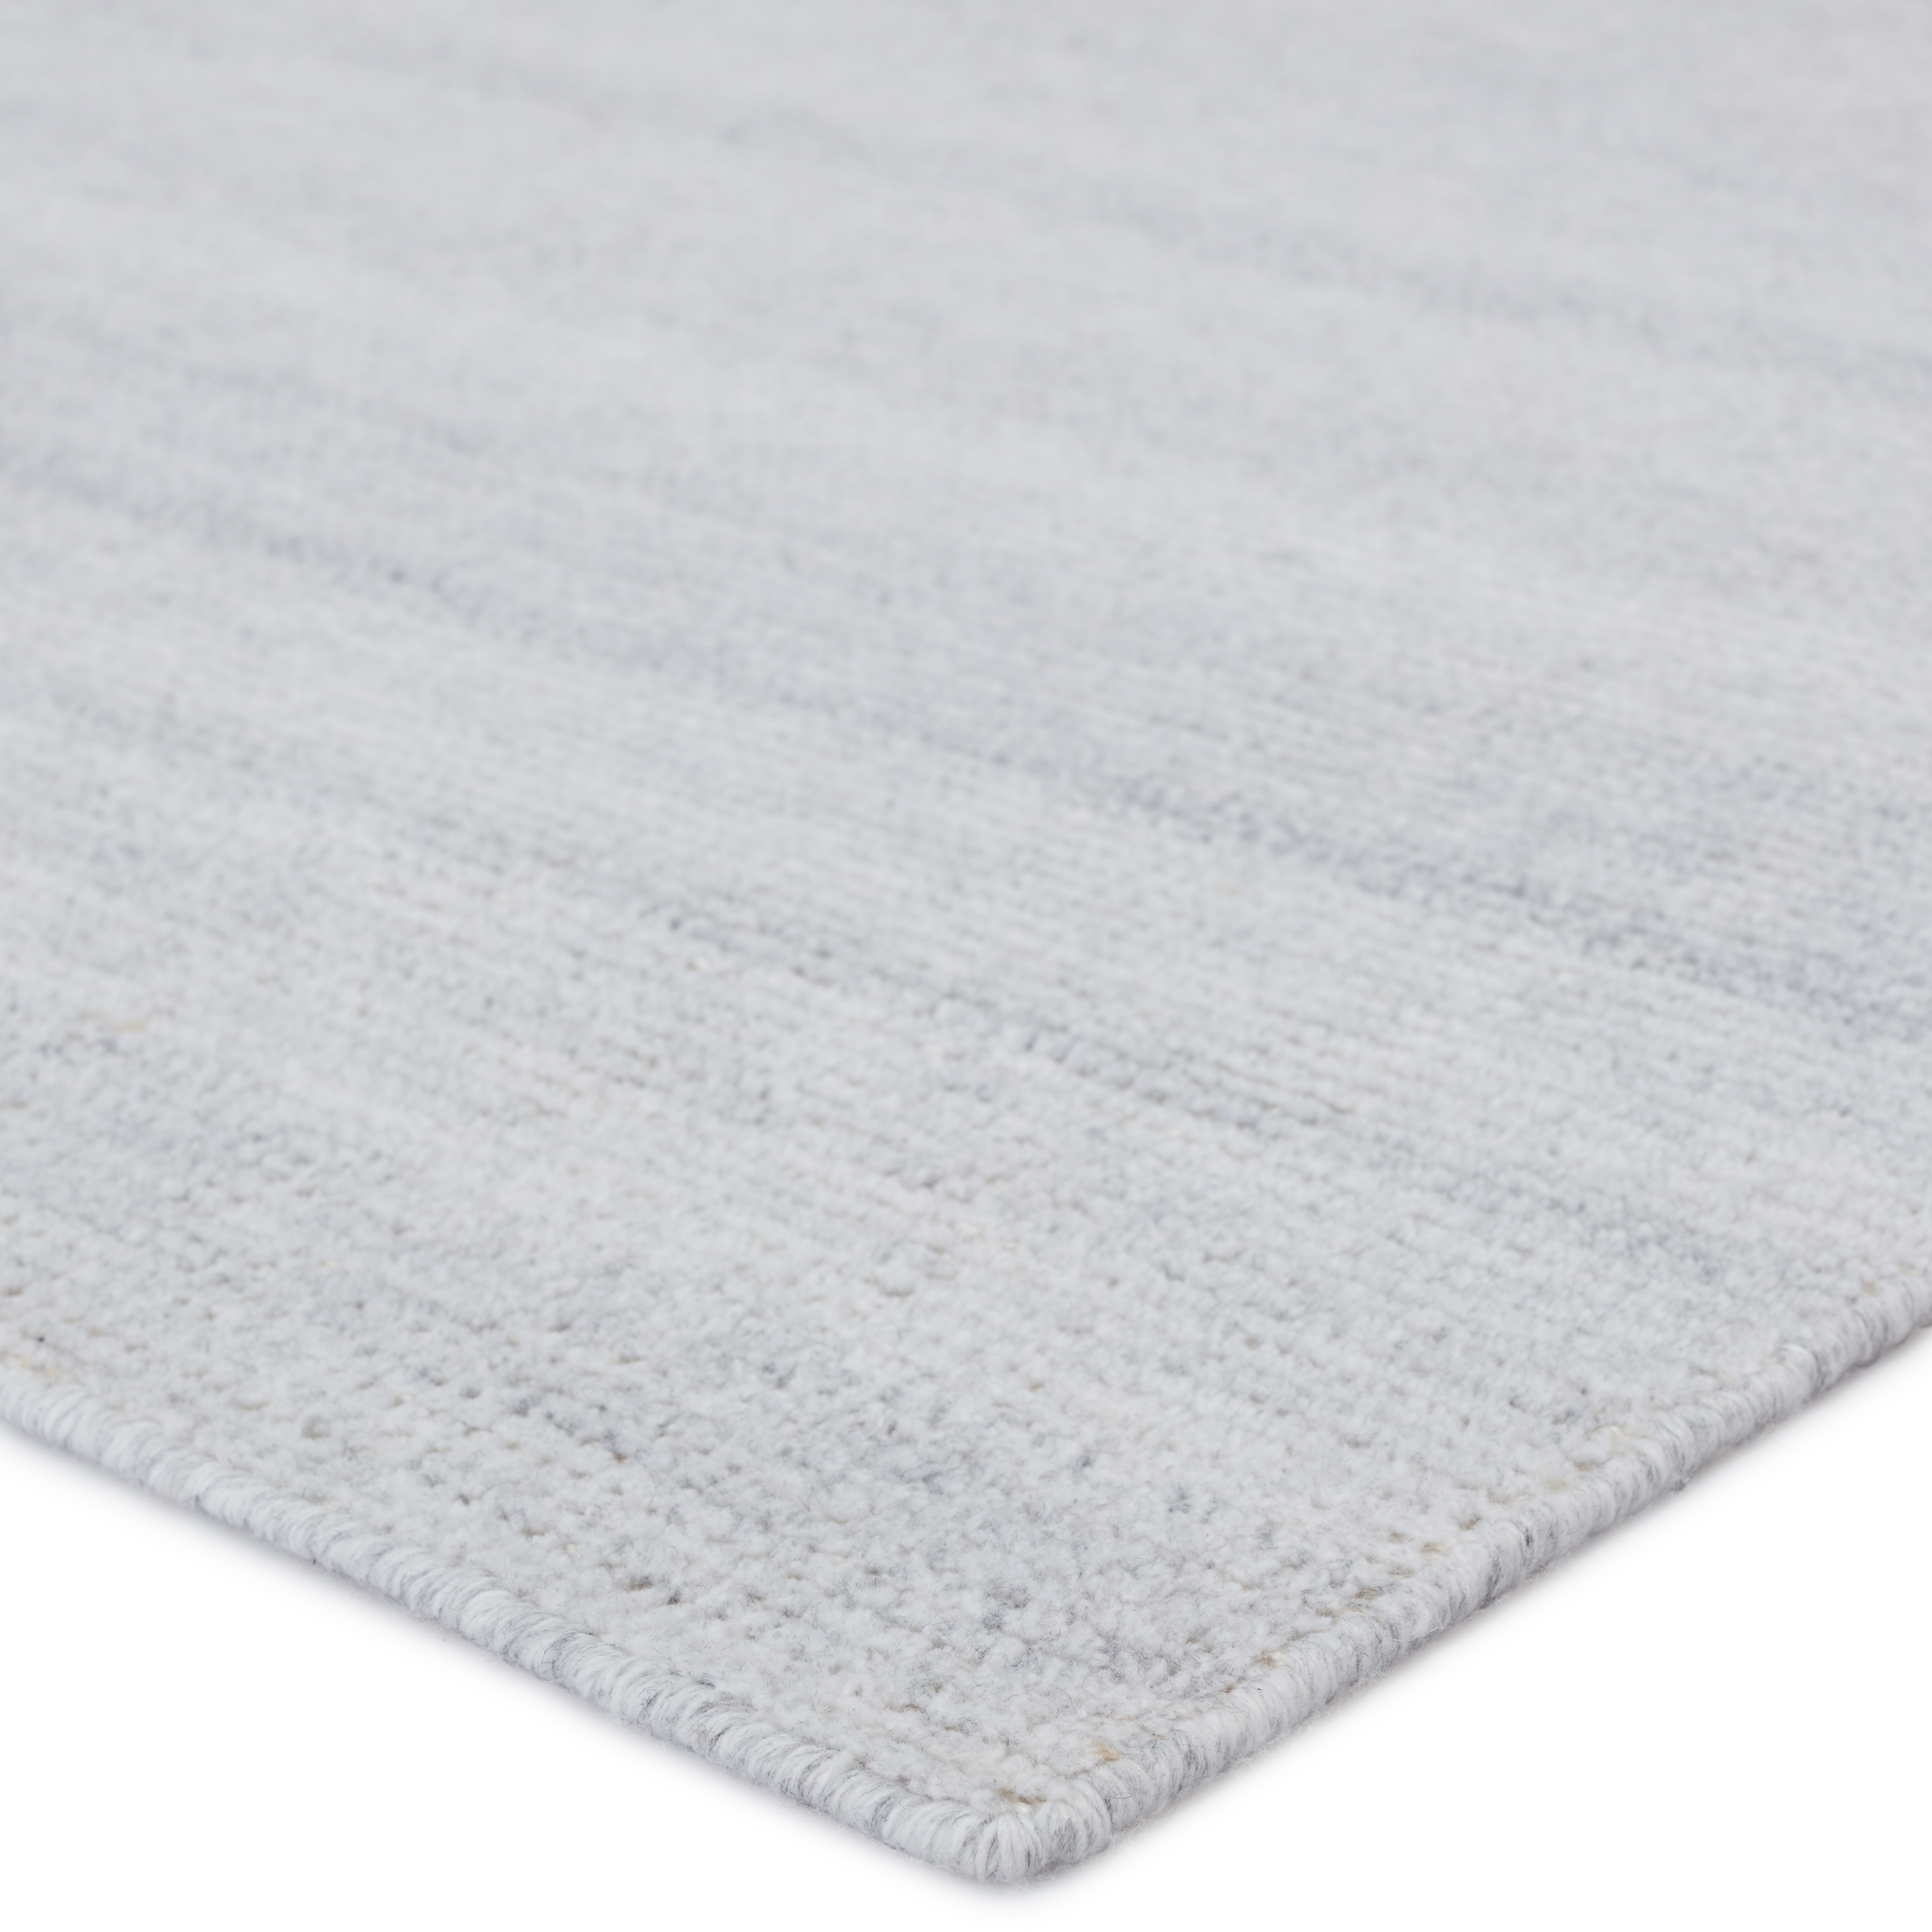 Limon Indoor/ Outdoor Solid White Area Rug. 7'10" X 10'10" - Image 1